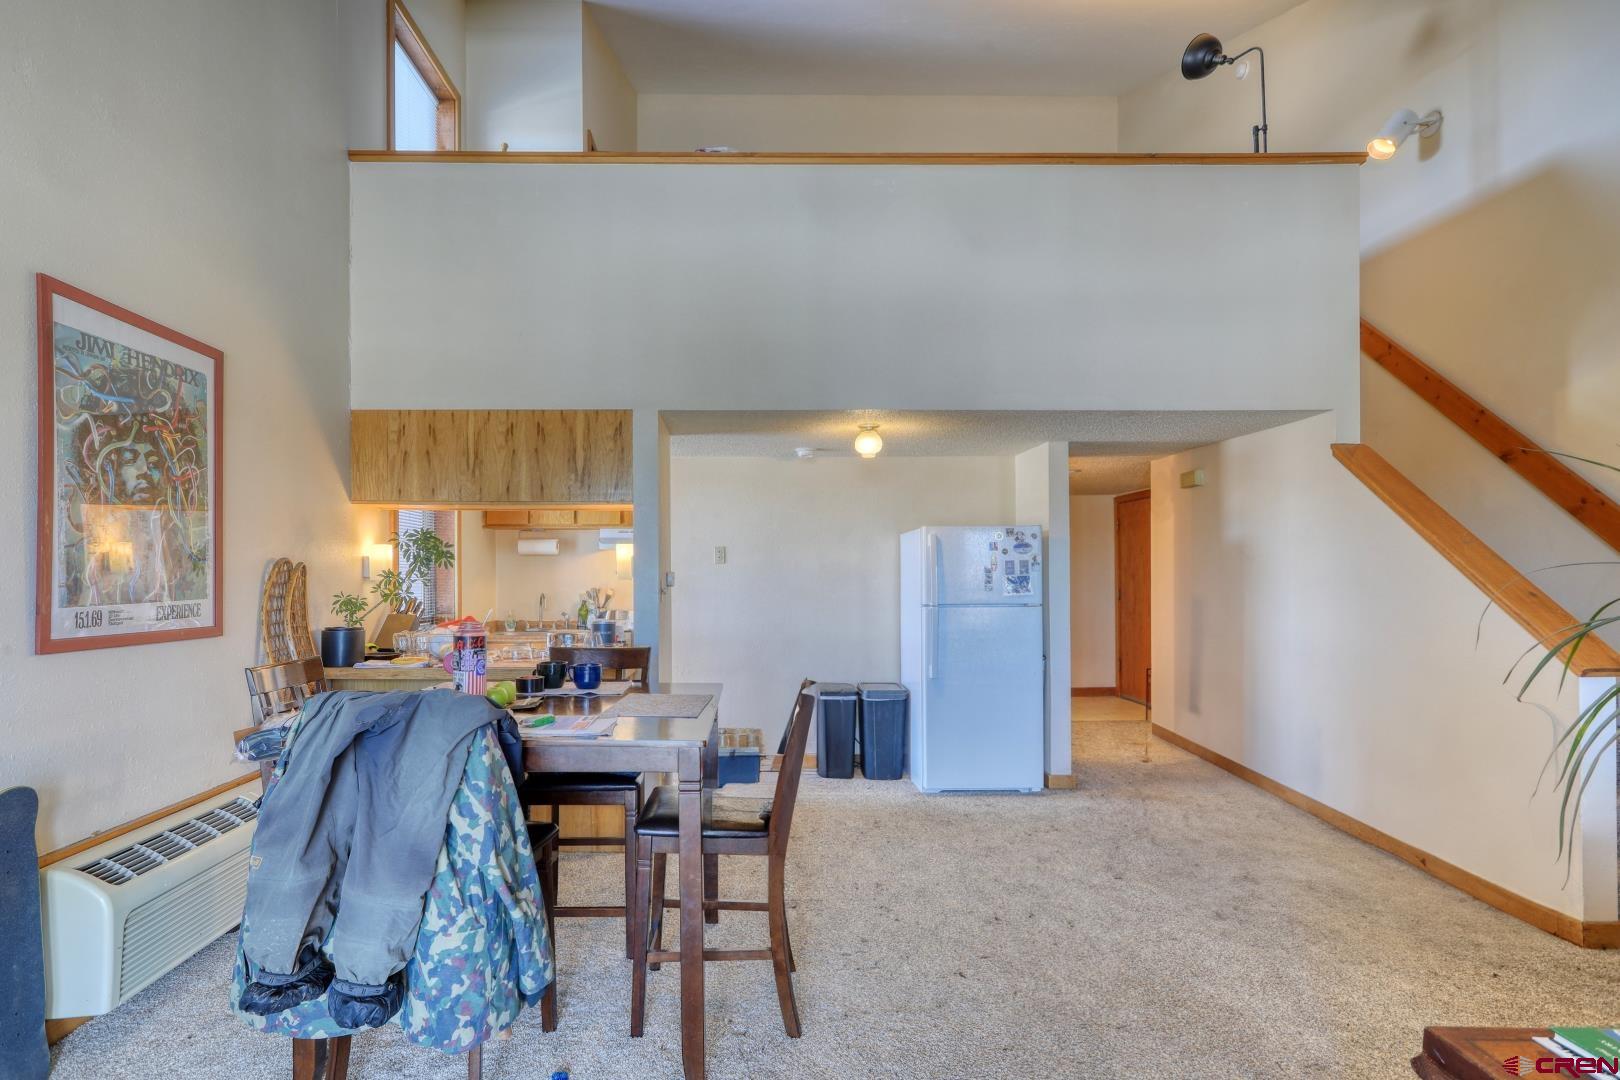 89 Valley View Drive, #3197, Pagosa Springs, CO 81147 Listing Photo  5